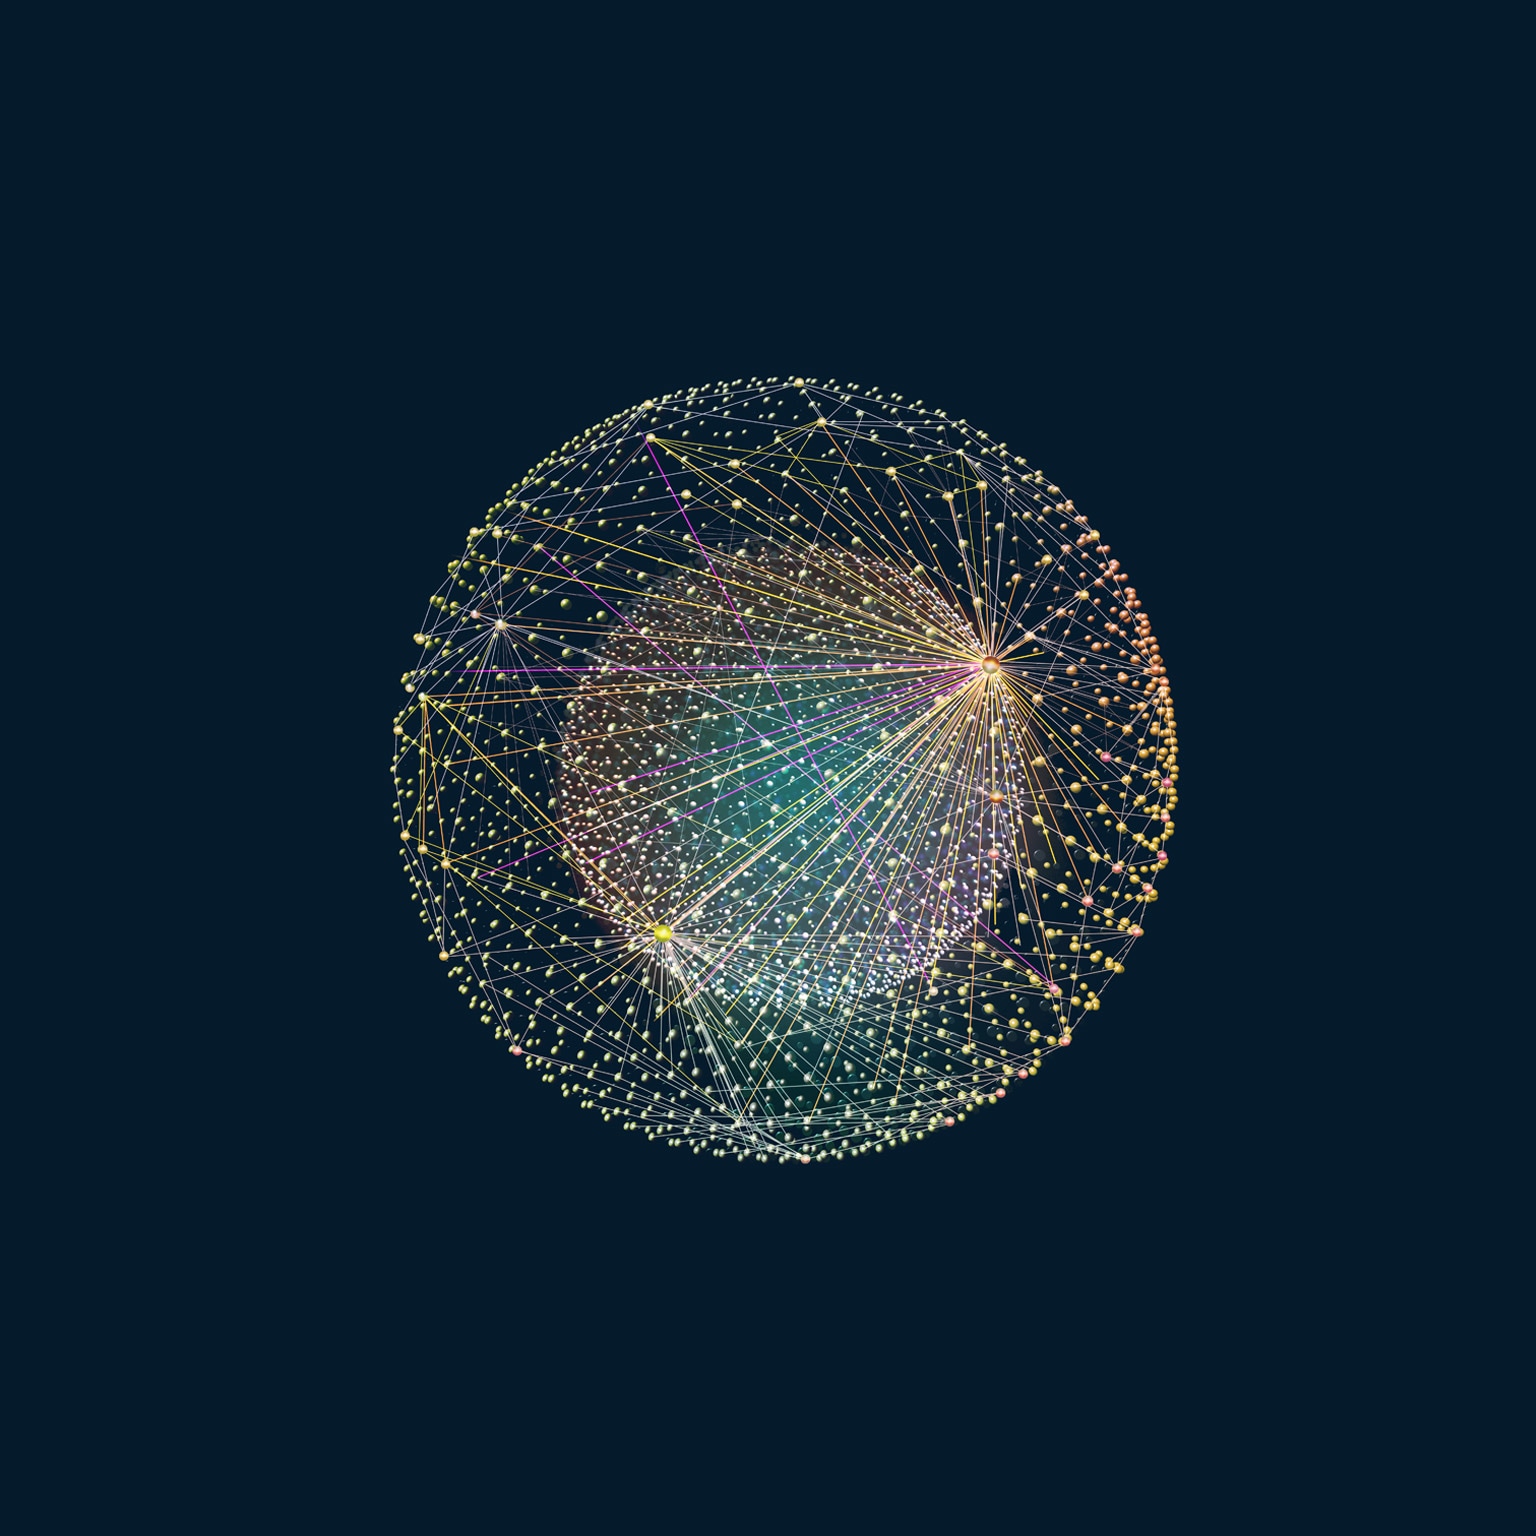 Vibrantly colored wires arranged in a circular pattern symbolizing interconnected digital relationships.